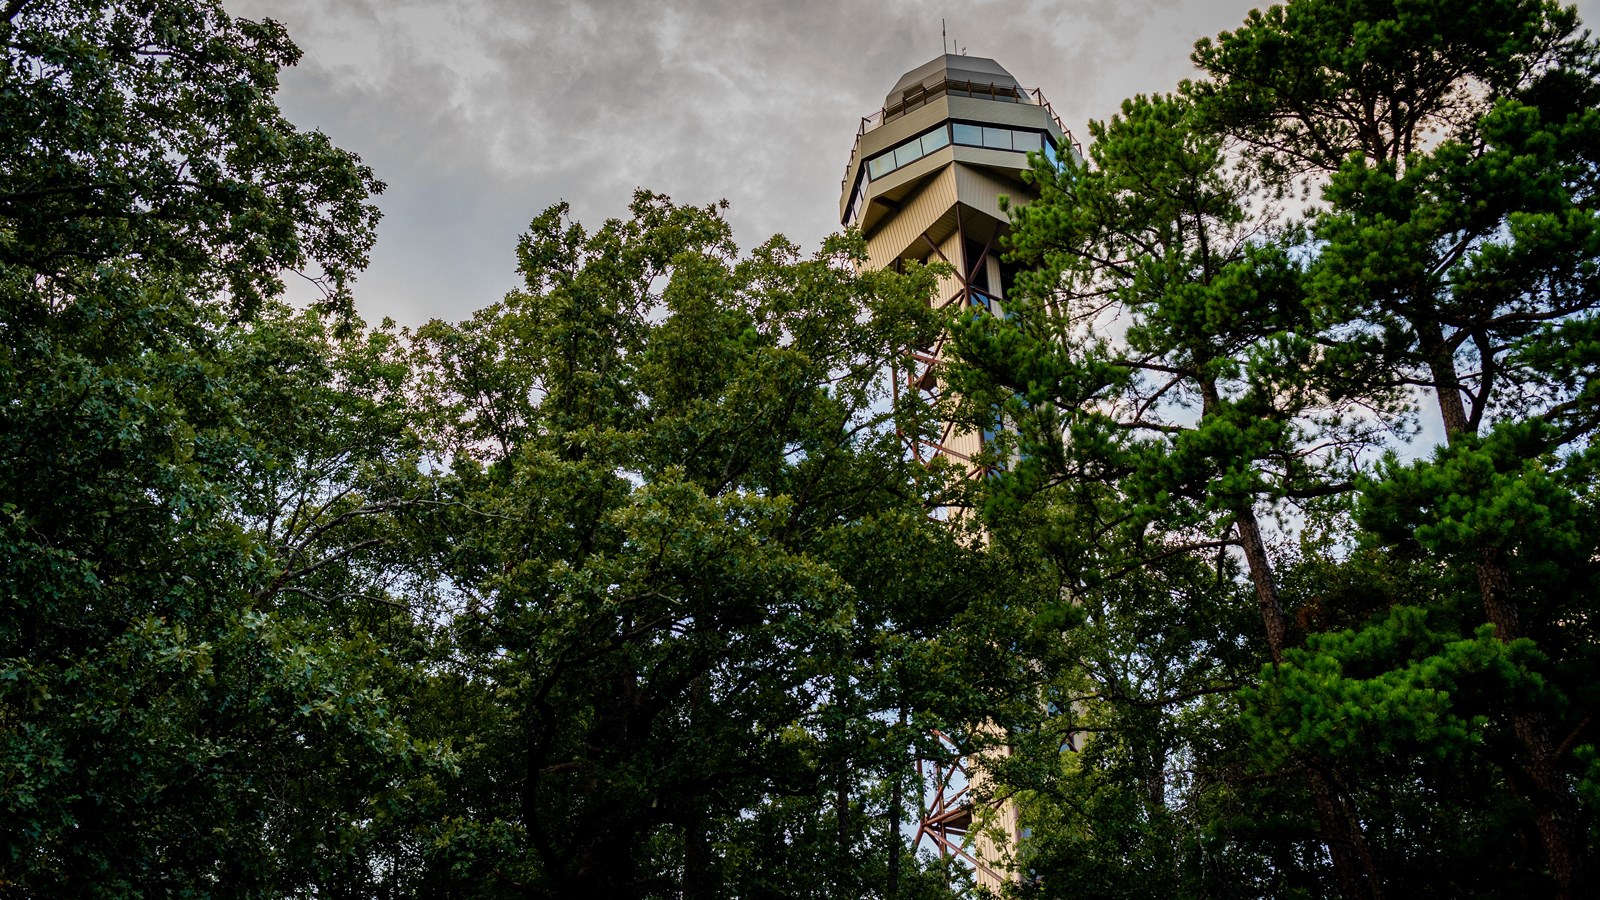 Hot Springs Mountain Tower is a 216 foot tall structure with an observation deck on top